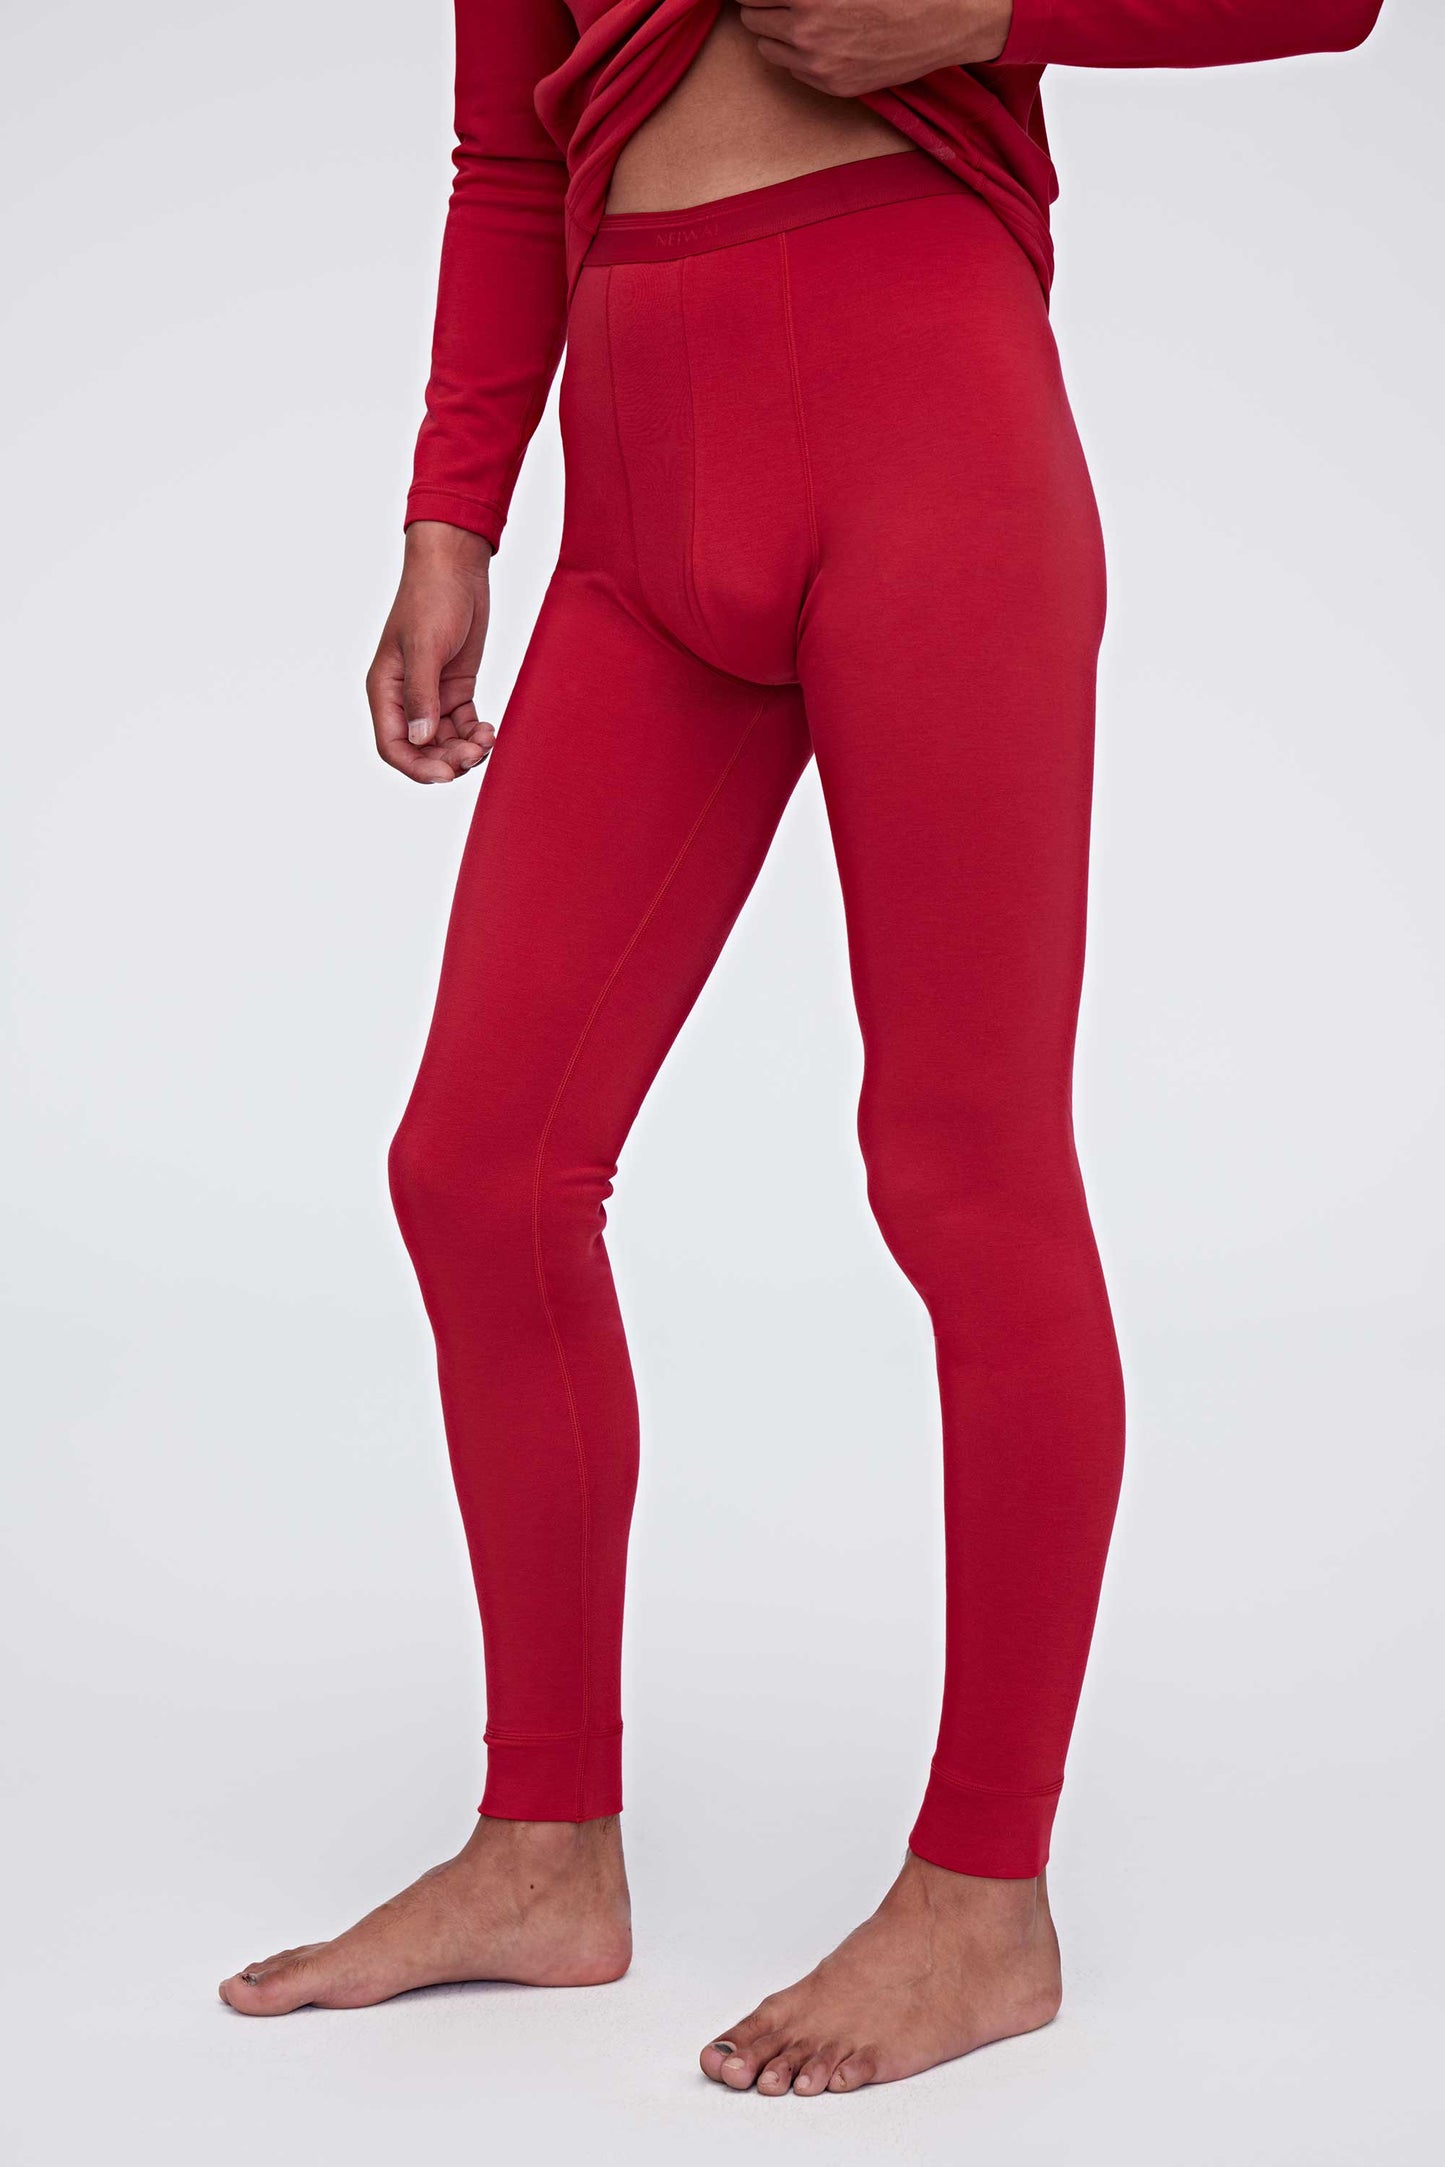 Side view of red thermal pants